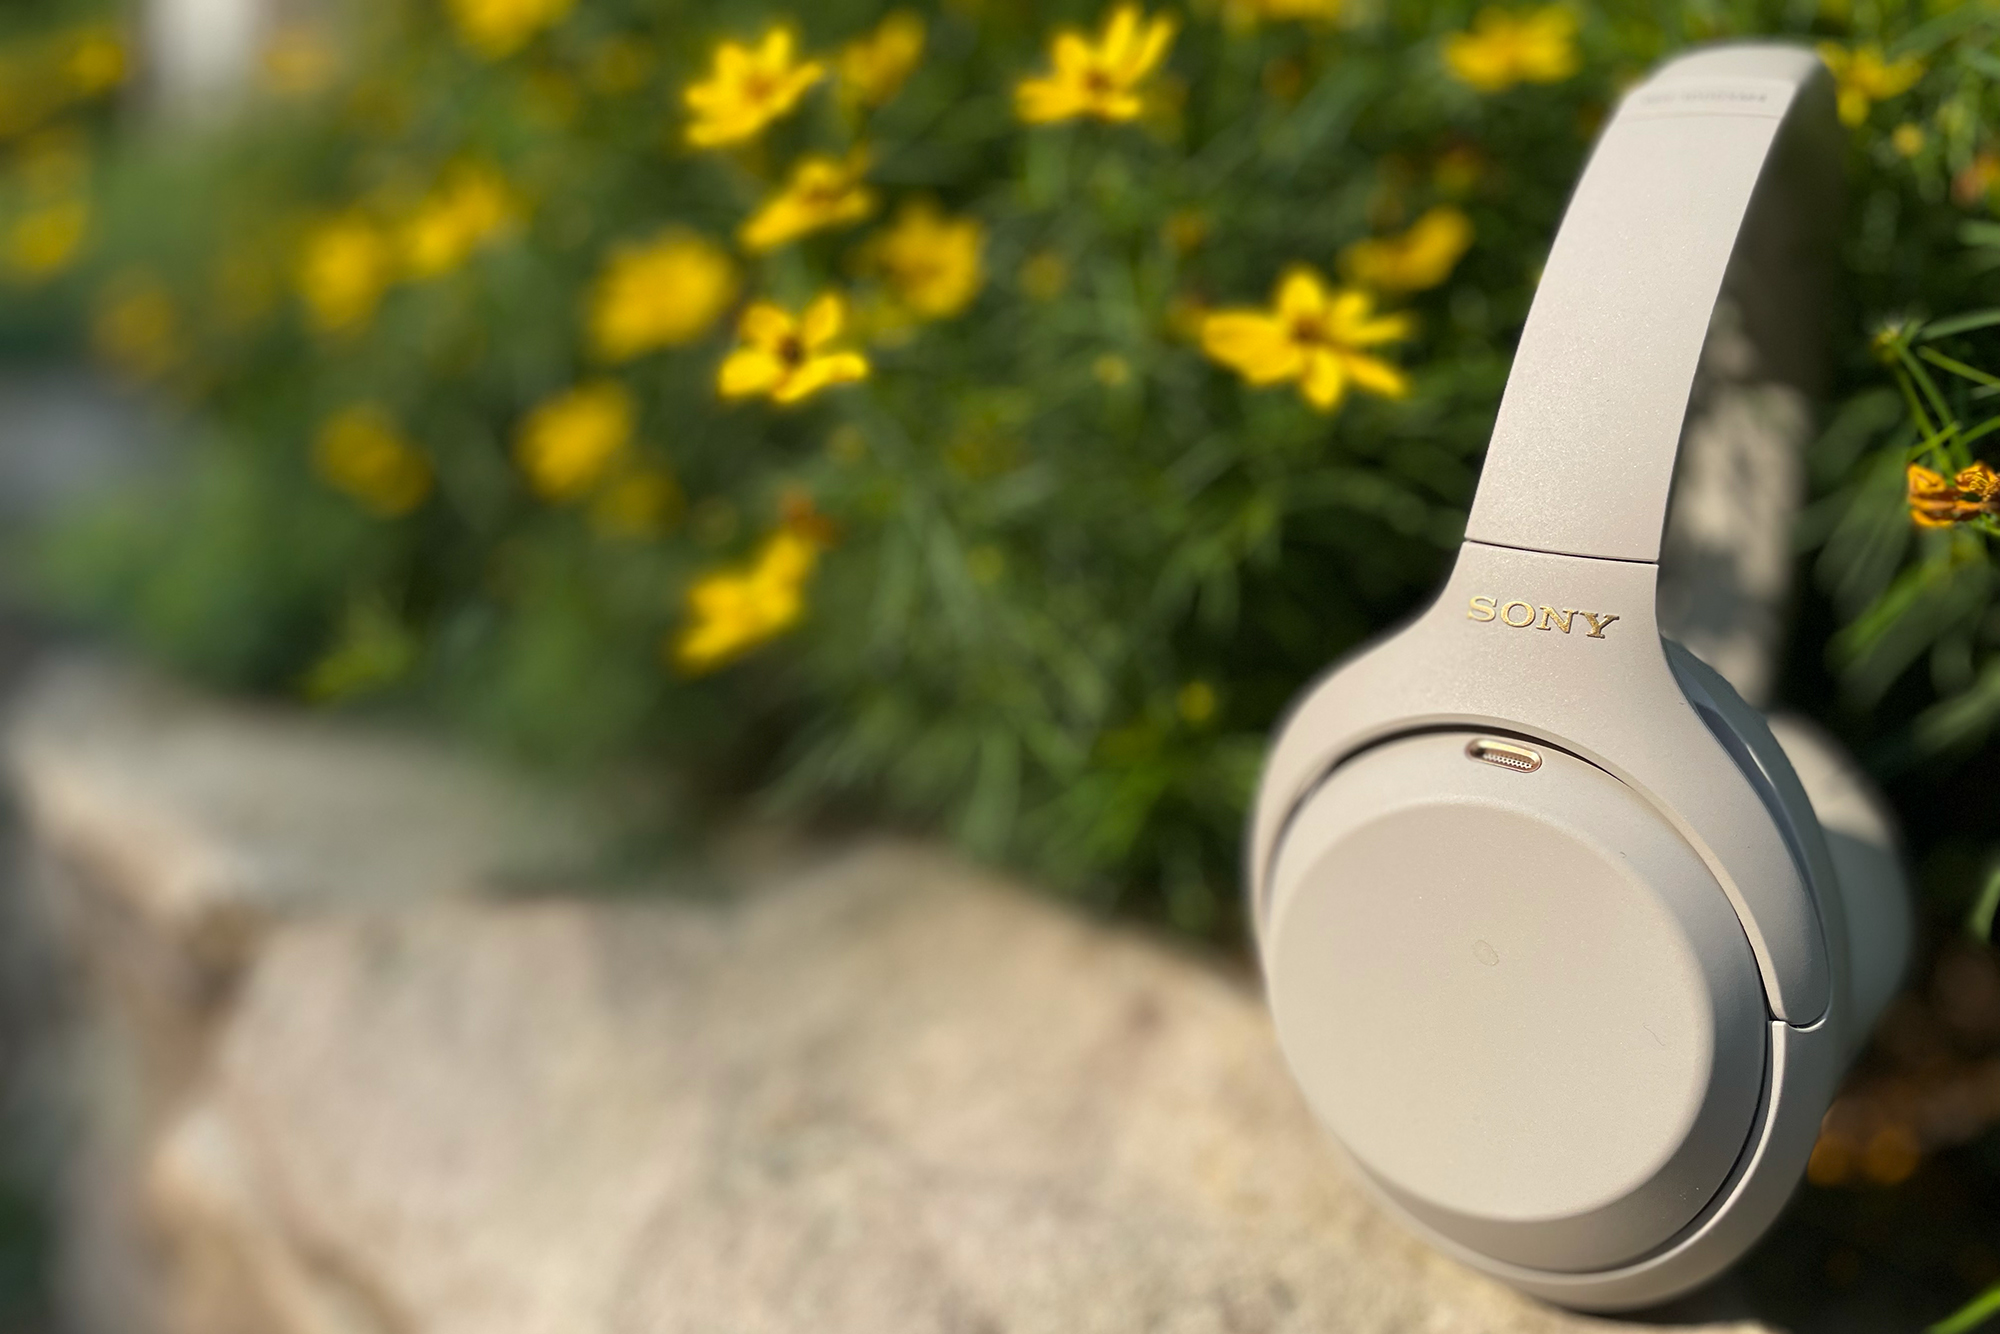 Sony WH-1000XM4 Wireless Noise Cancelling Headphones Review